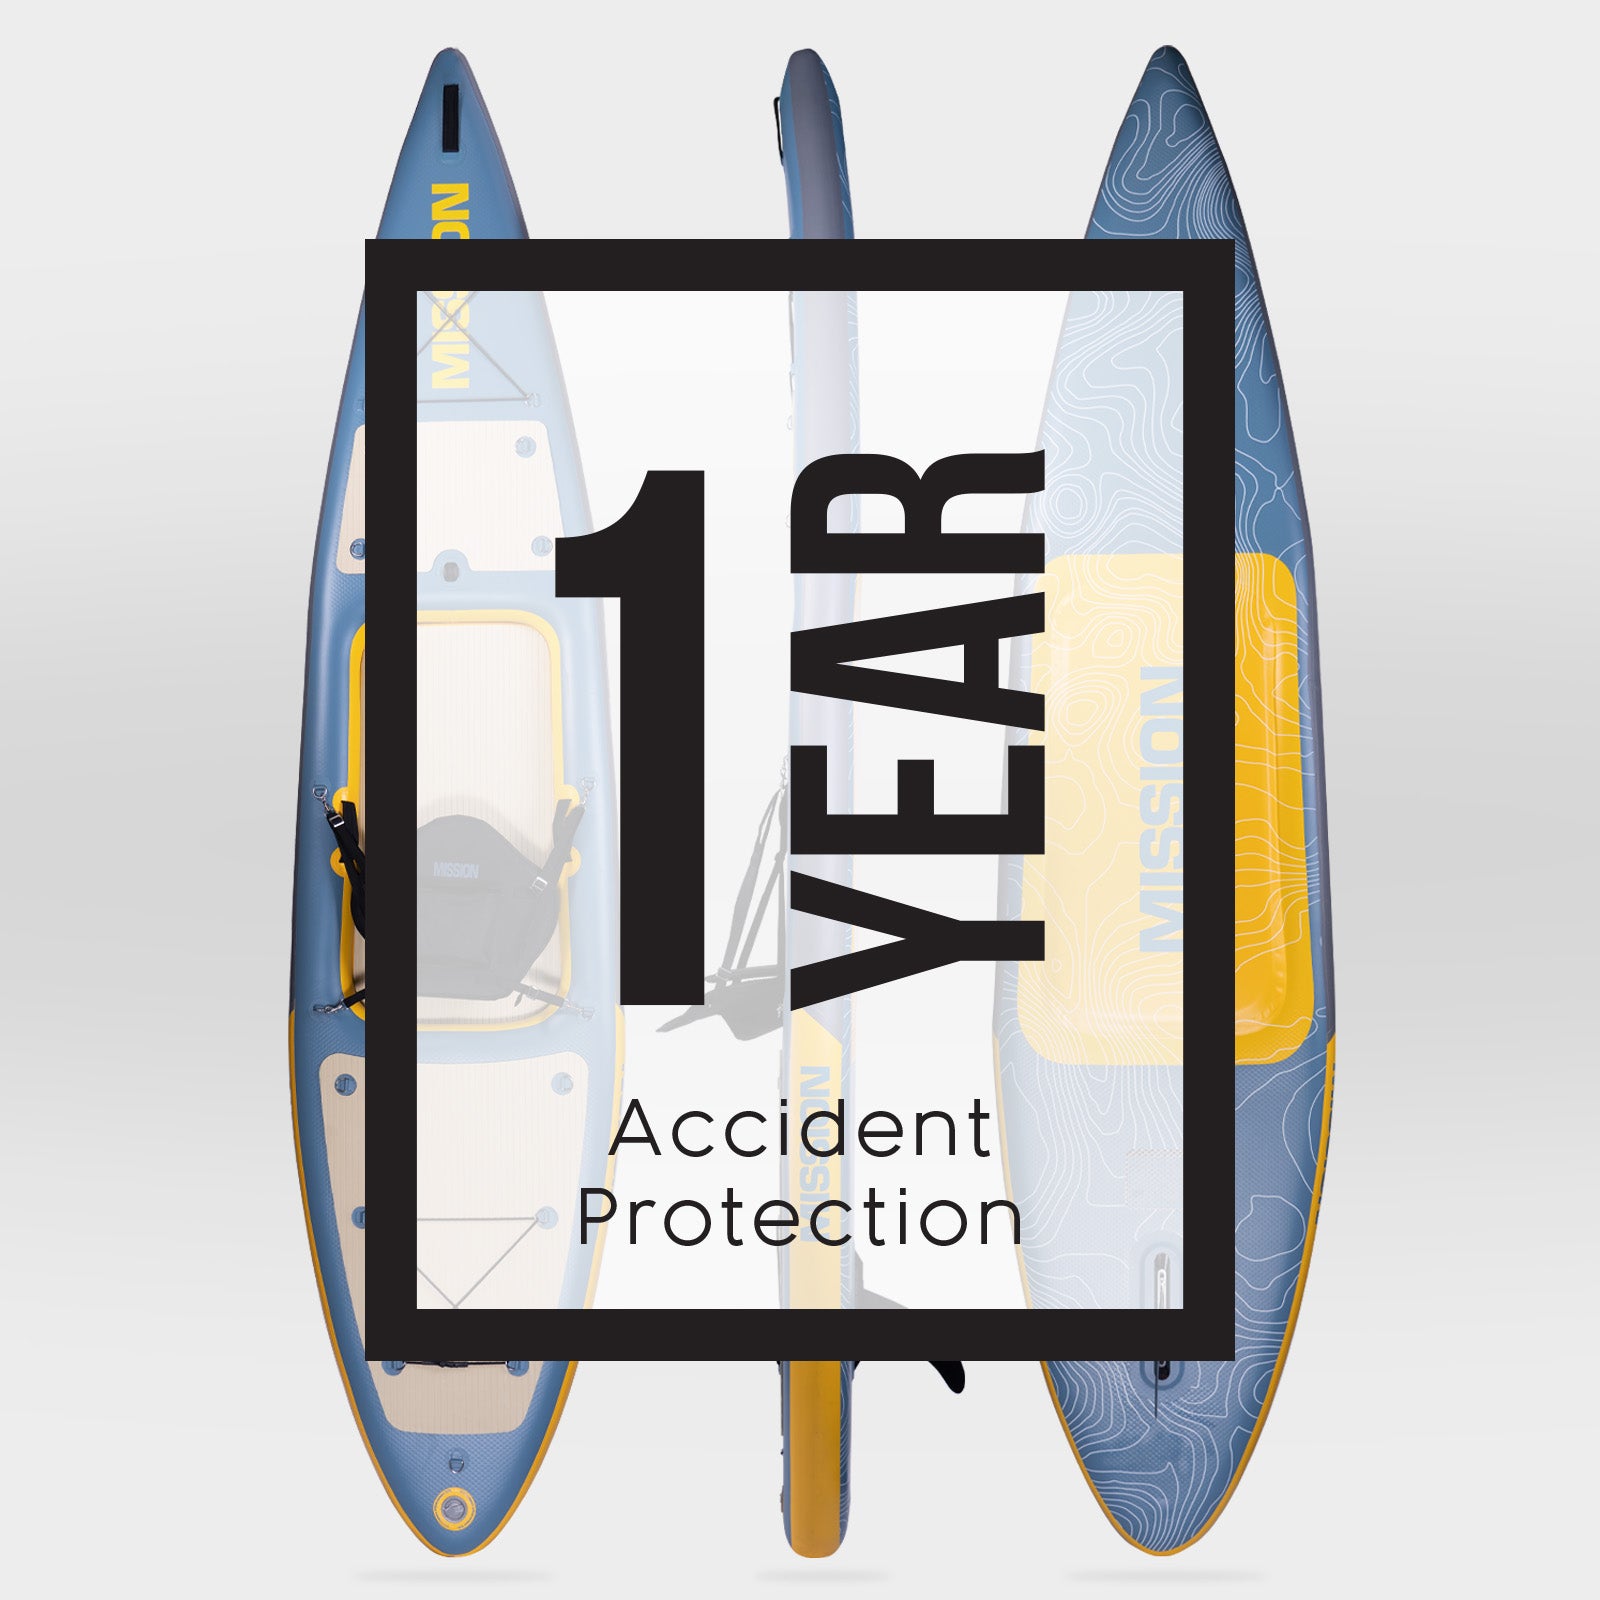 Accident Protection | Inflatable Protection Plans